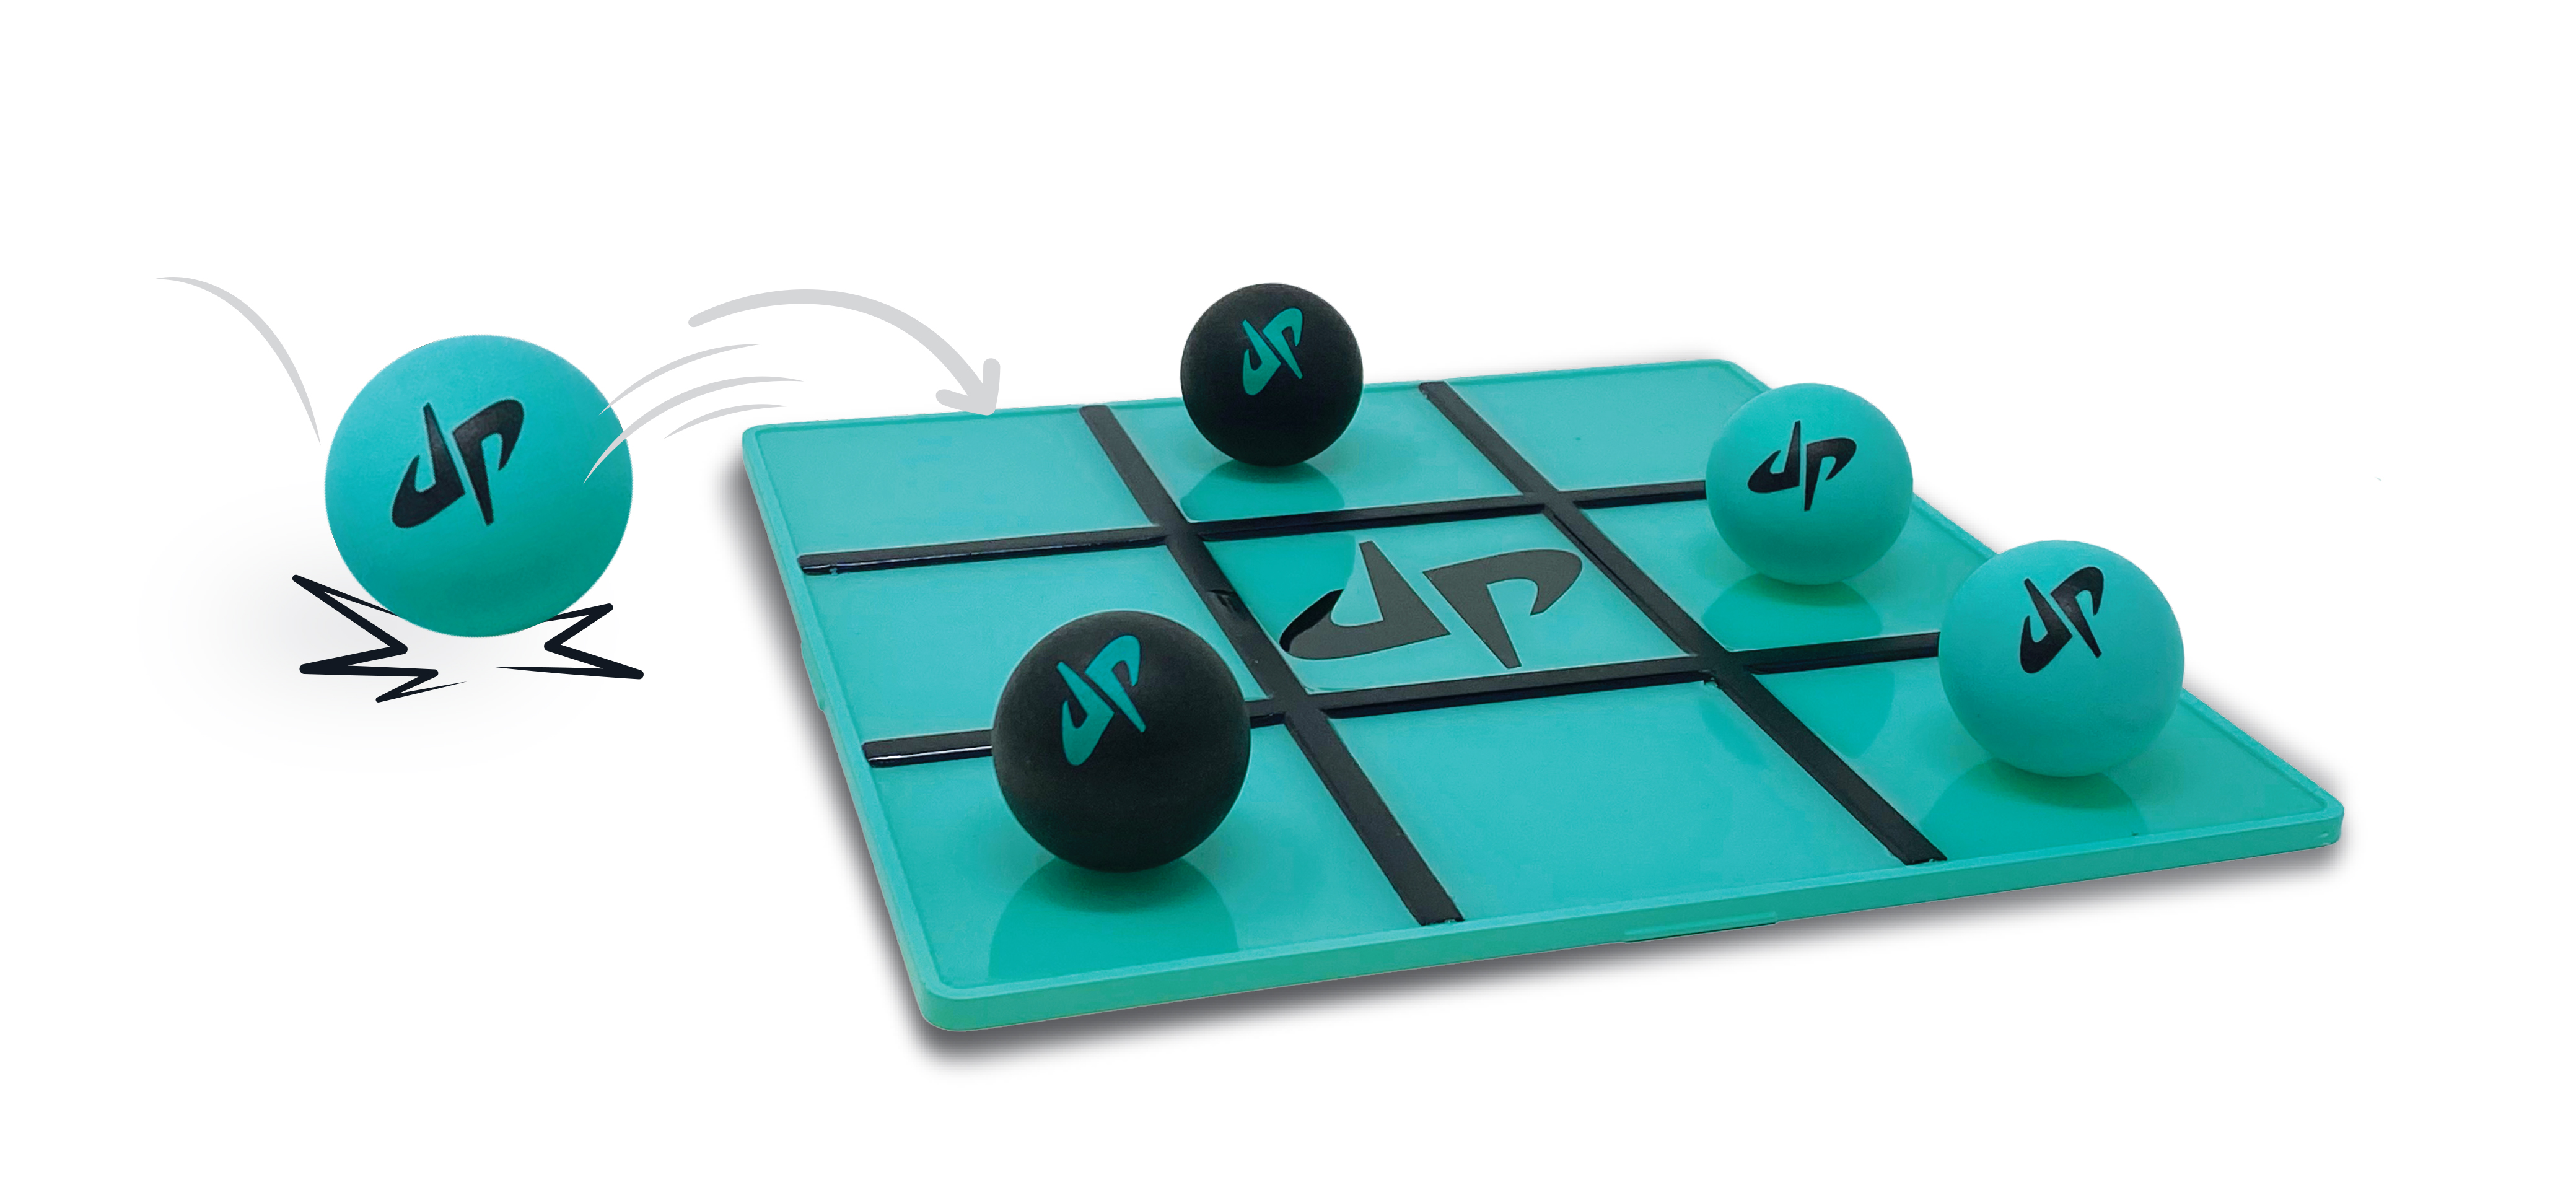 Dude Perfect Sticky Tic Tac Toe, Target Toss Game 